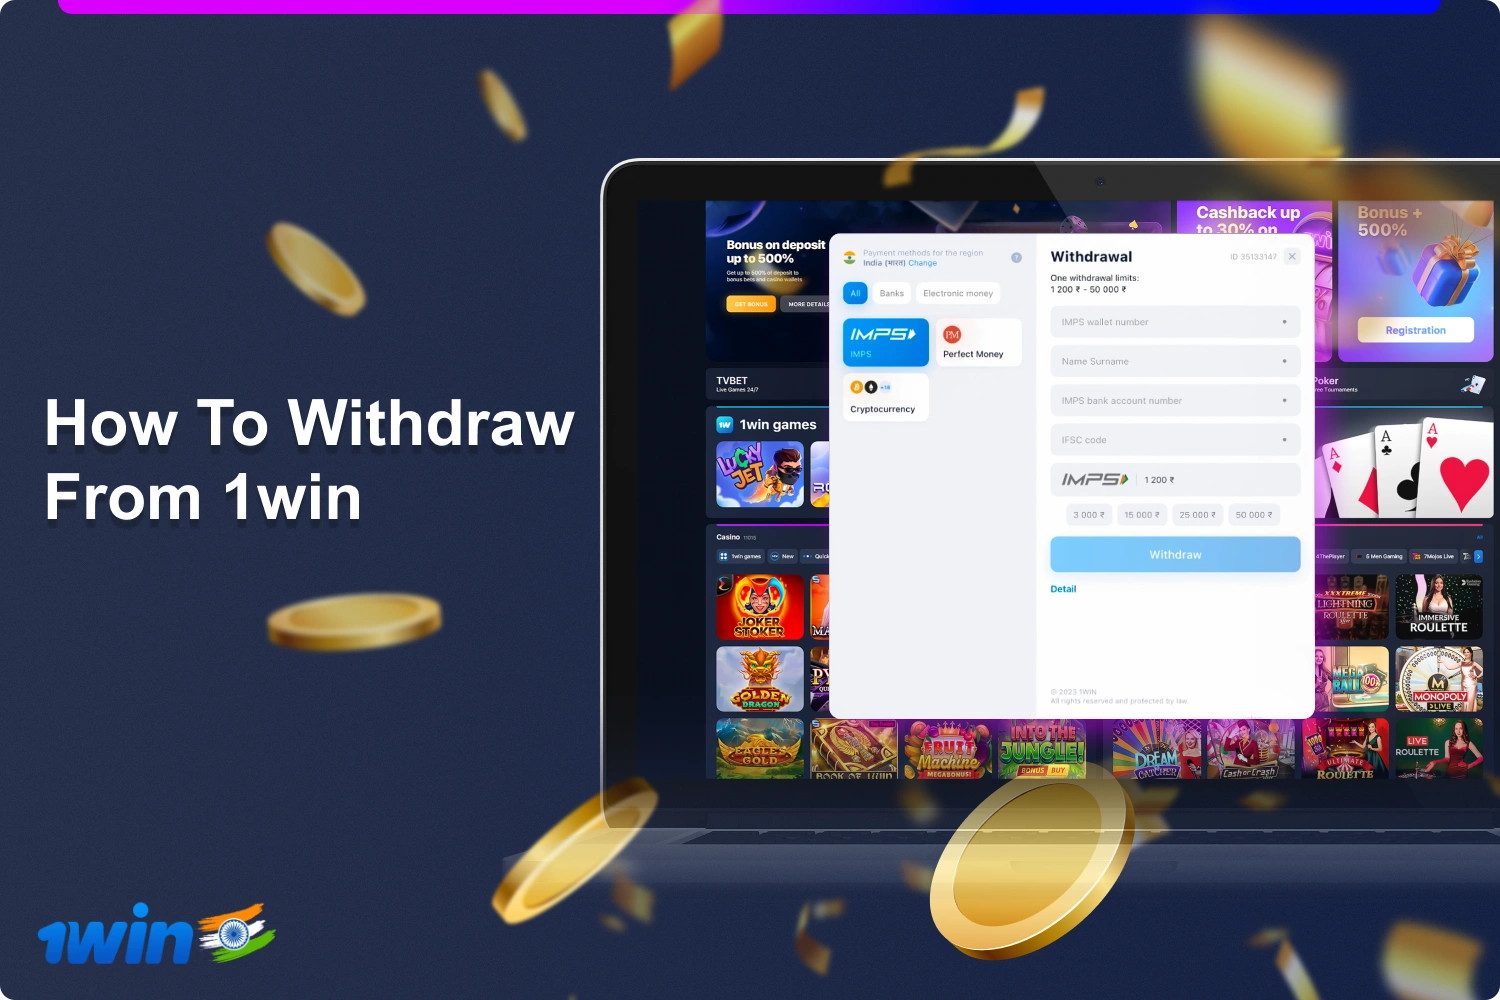 After winning at 1win casino, Indian players can go through the withdrawal process at 1win India